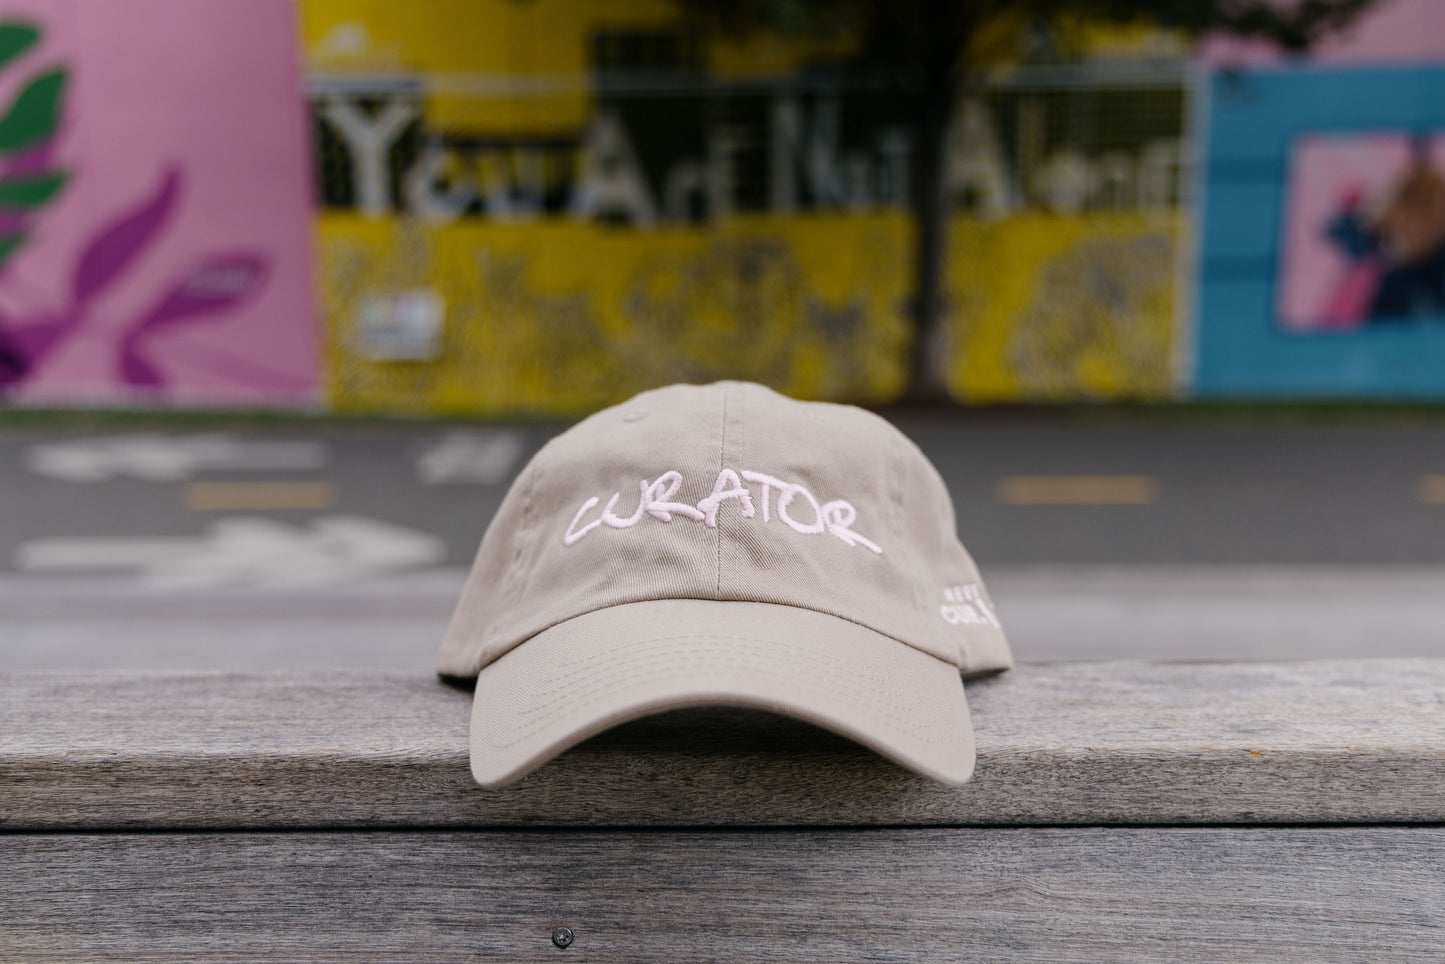 Curator's Dad Hat